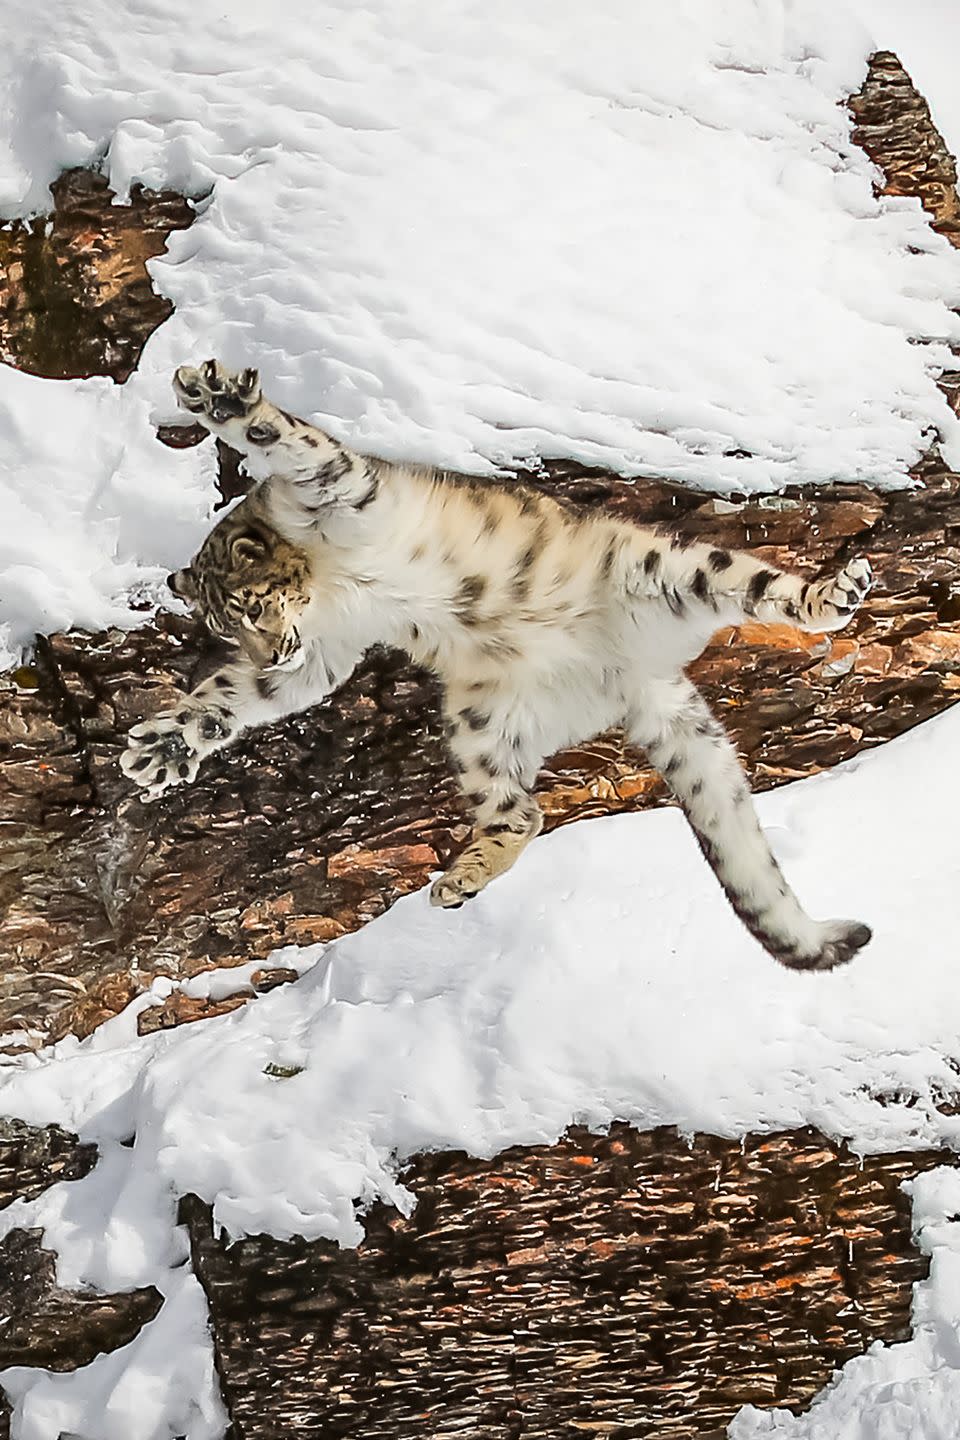 39. Snow leopards are incredible leapers.